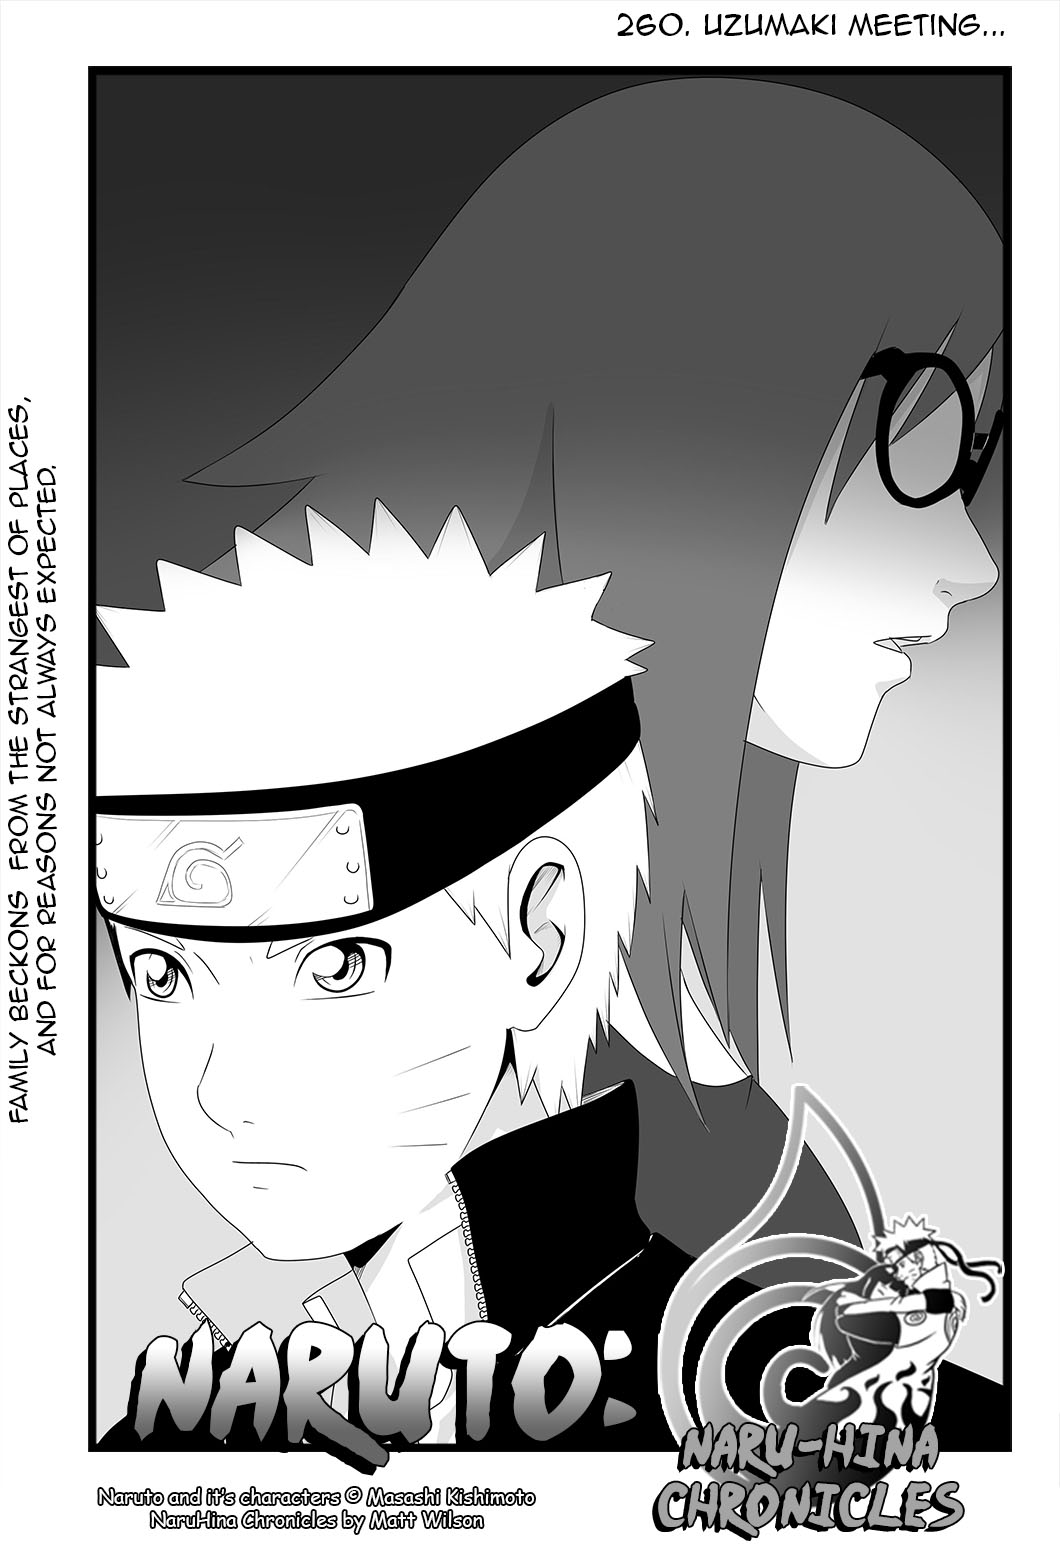 Your Smile [COMIC] - Chapter 4 - HyphenL - Naruto [Archive of Our Own]